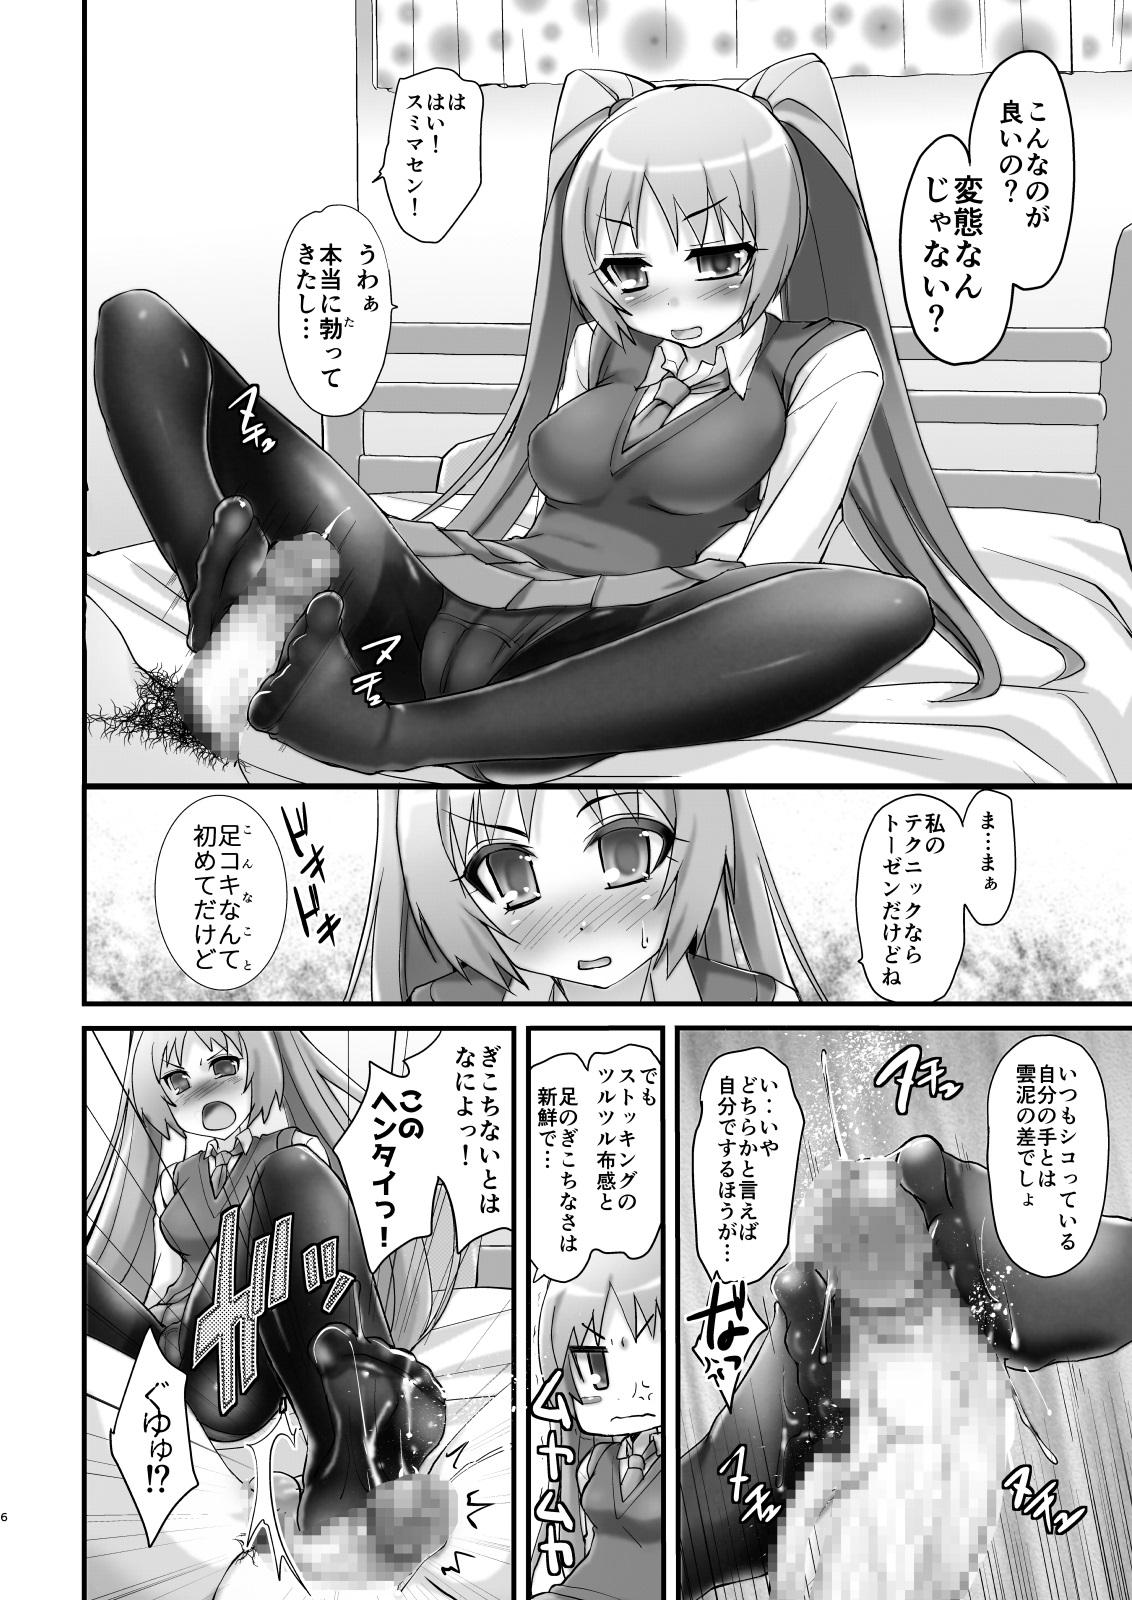 Spank Tsundere Tights to Twintails - Original Fuck For Cash - Page 6